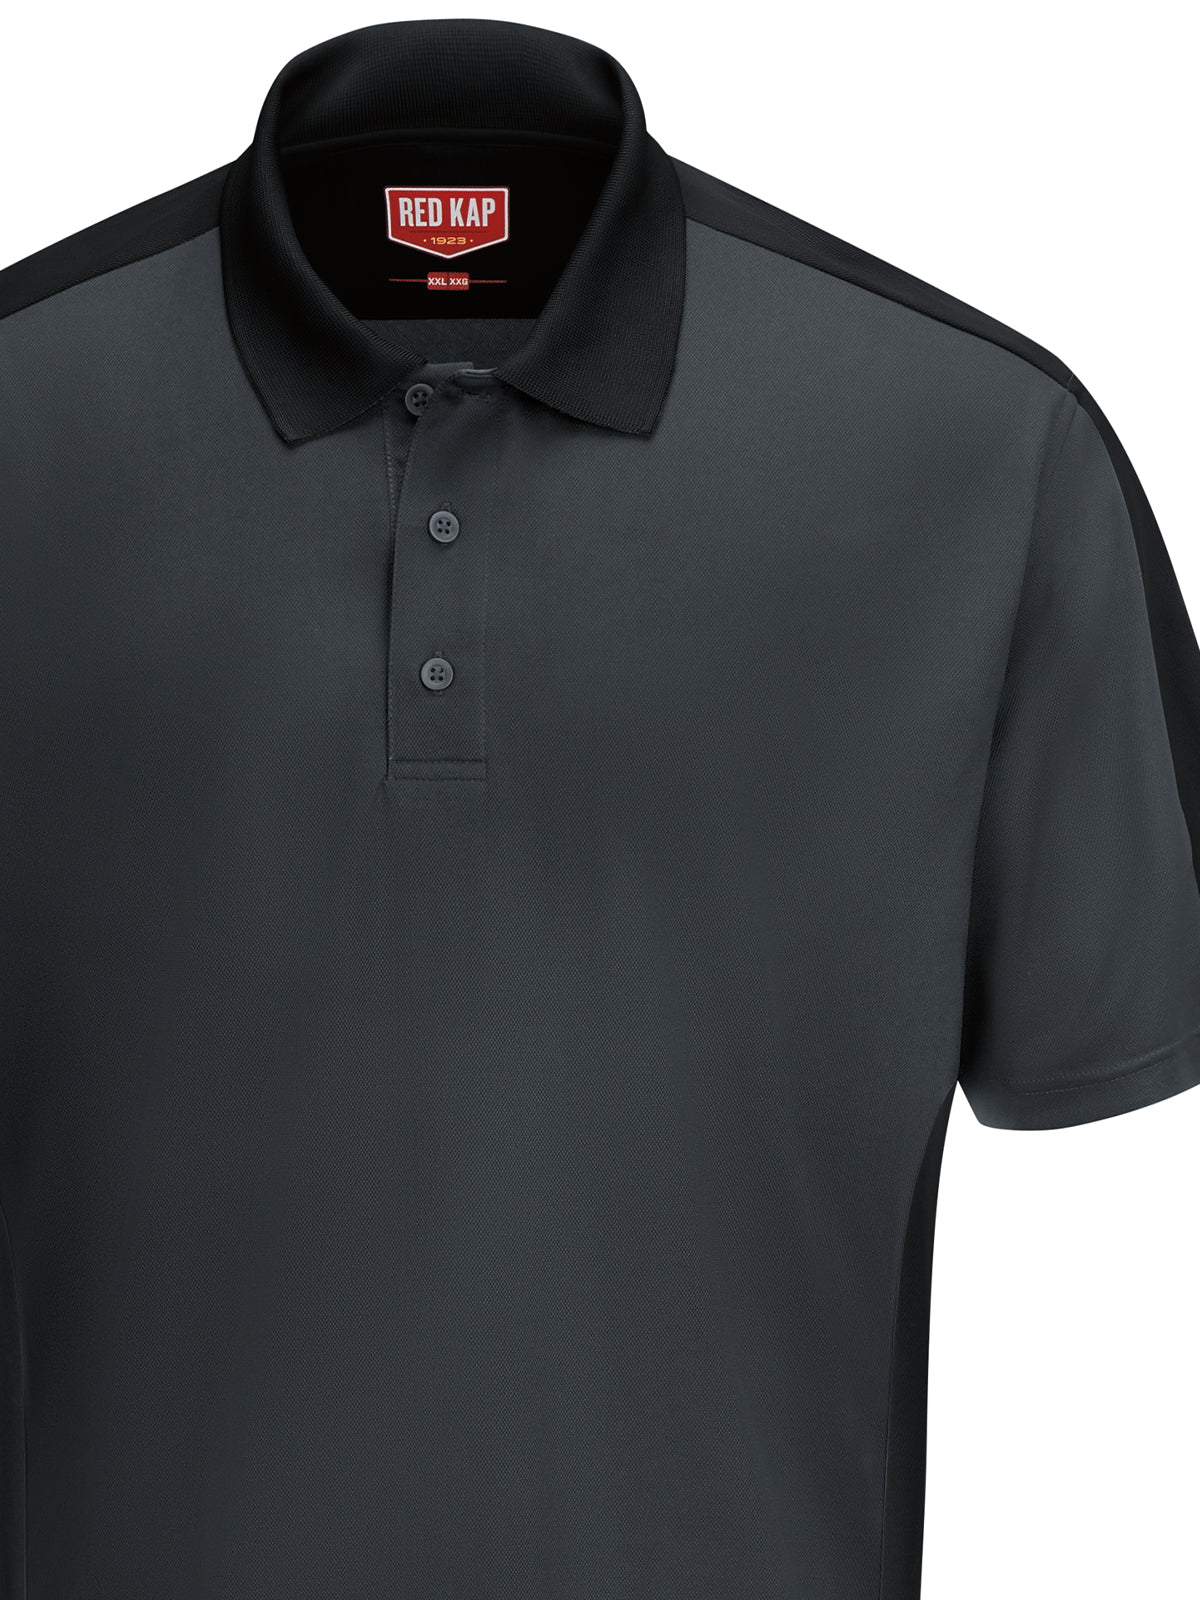 Men's Short Sleeve Performance Knit Two-Tone Polo - SK54 - Charcoal/Black